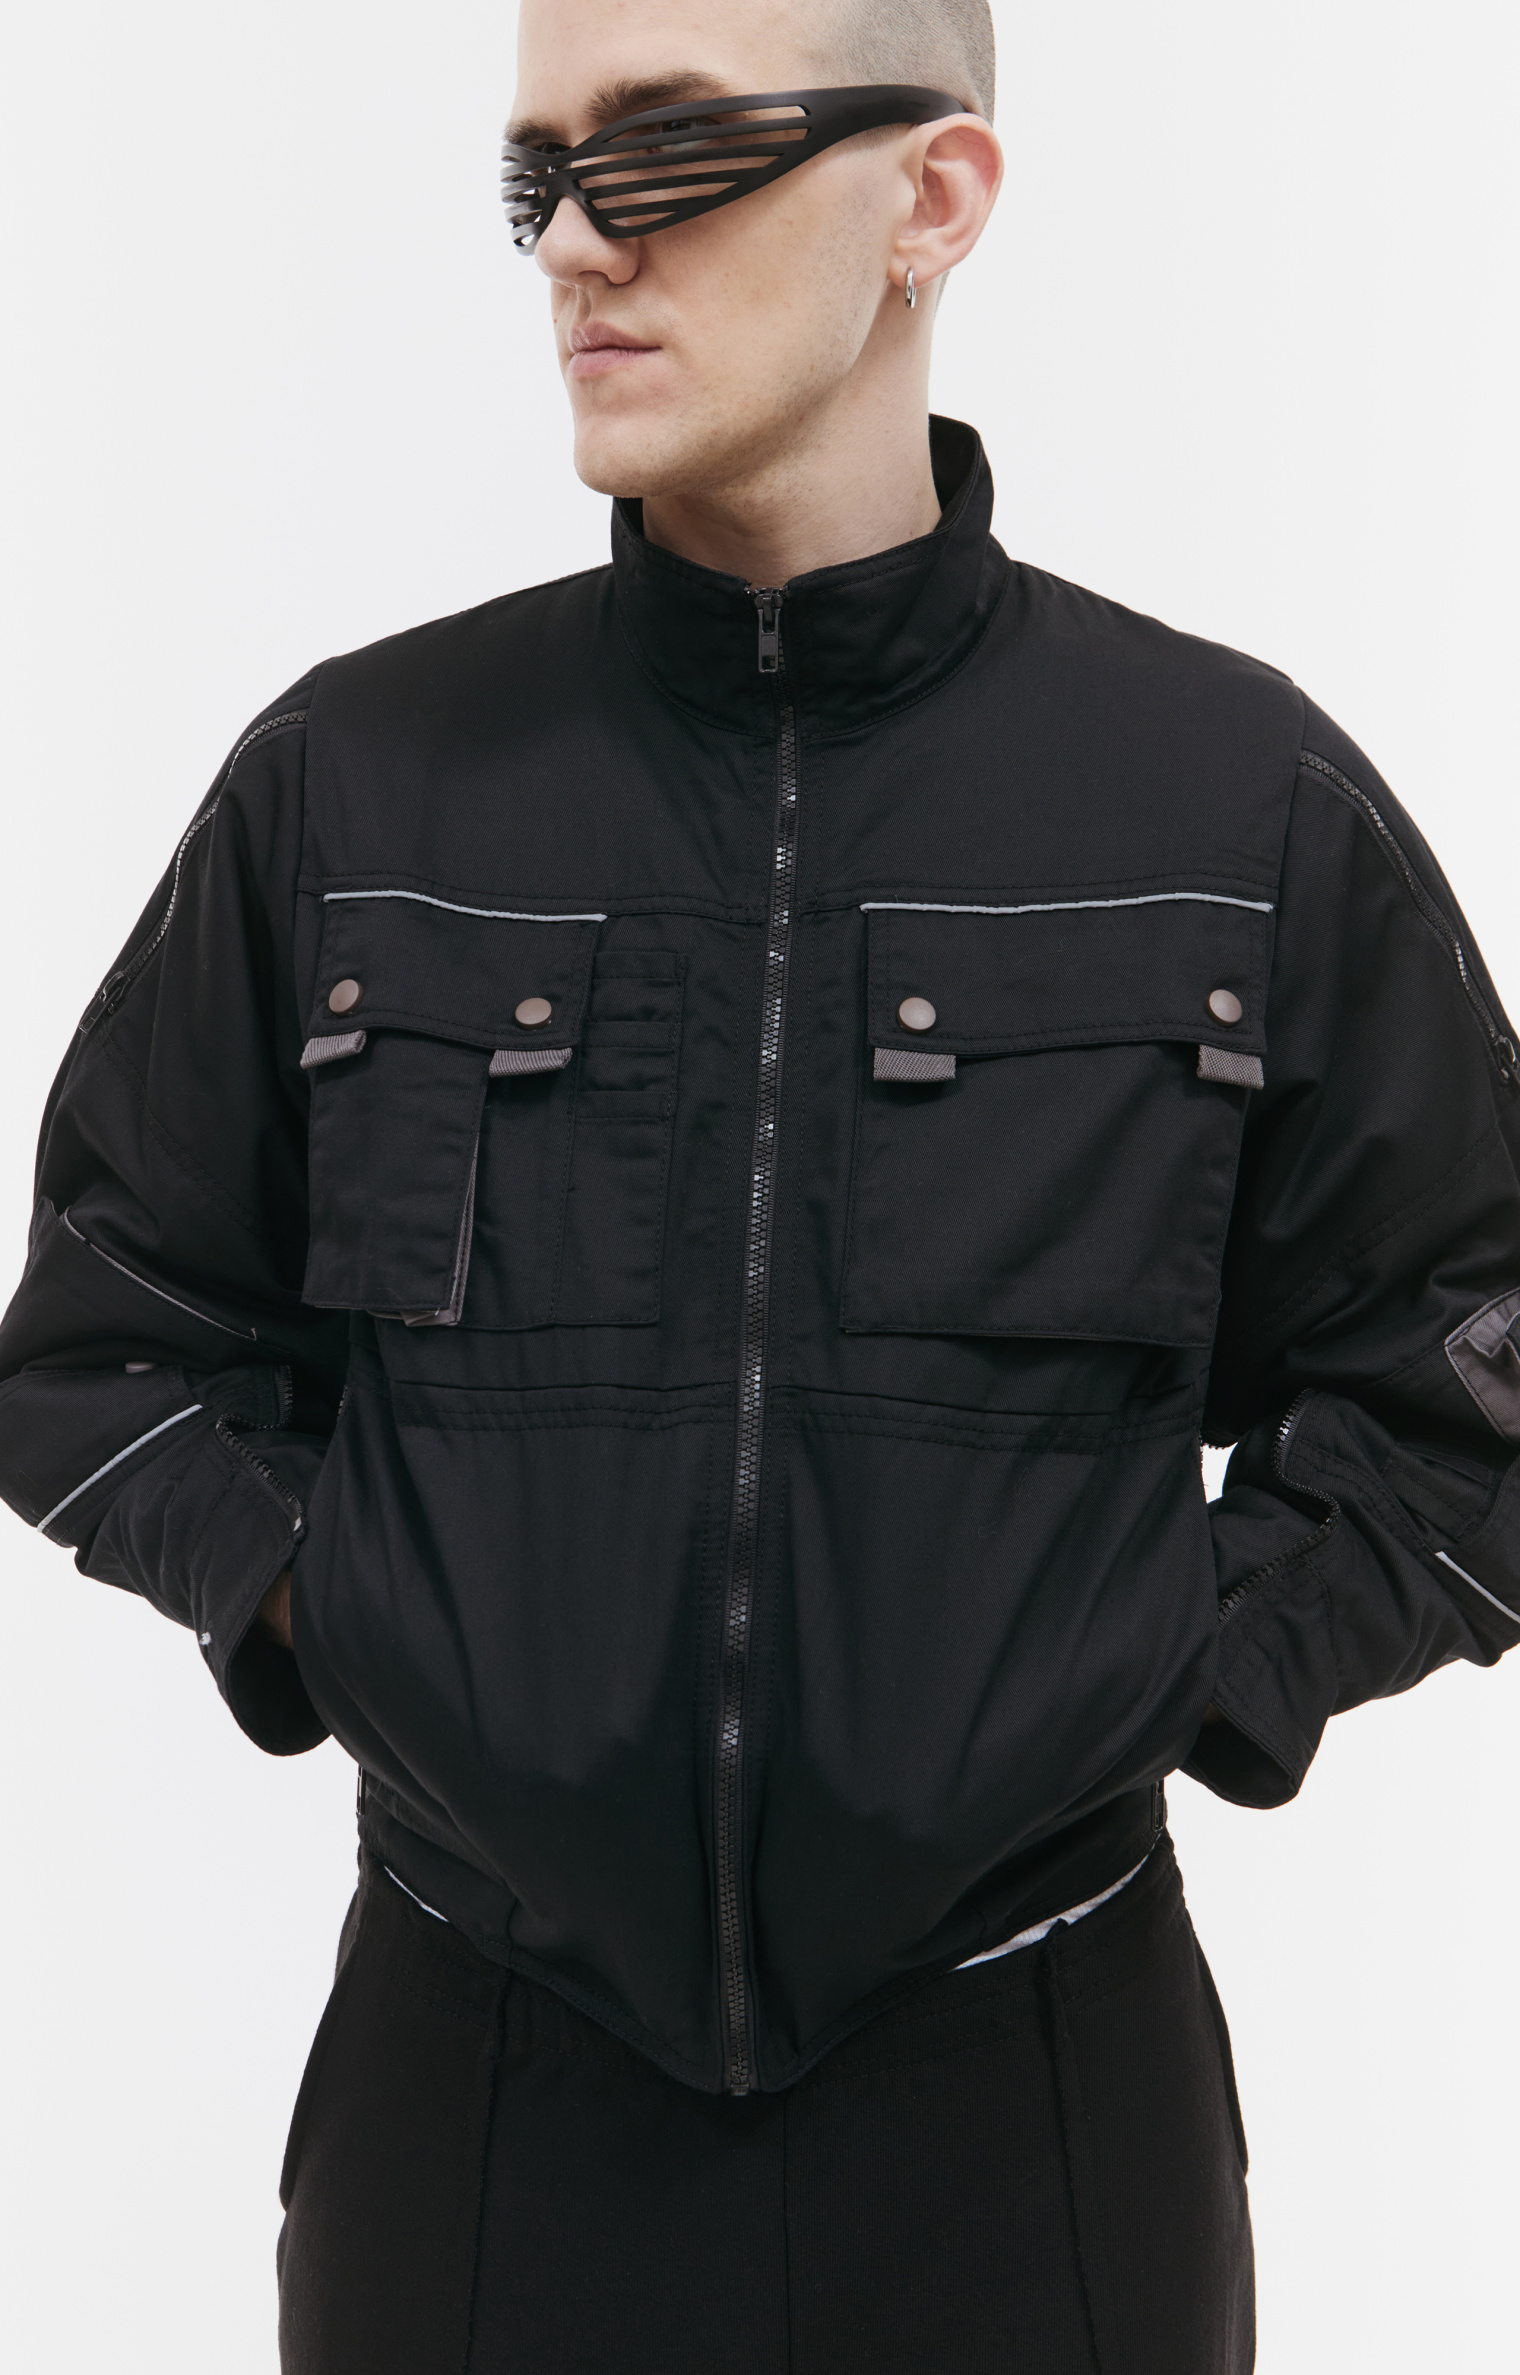 PROTOTYPES Bomber jacket with patch pockets